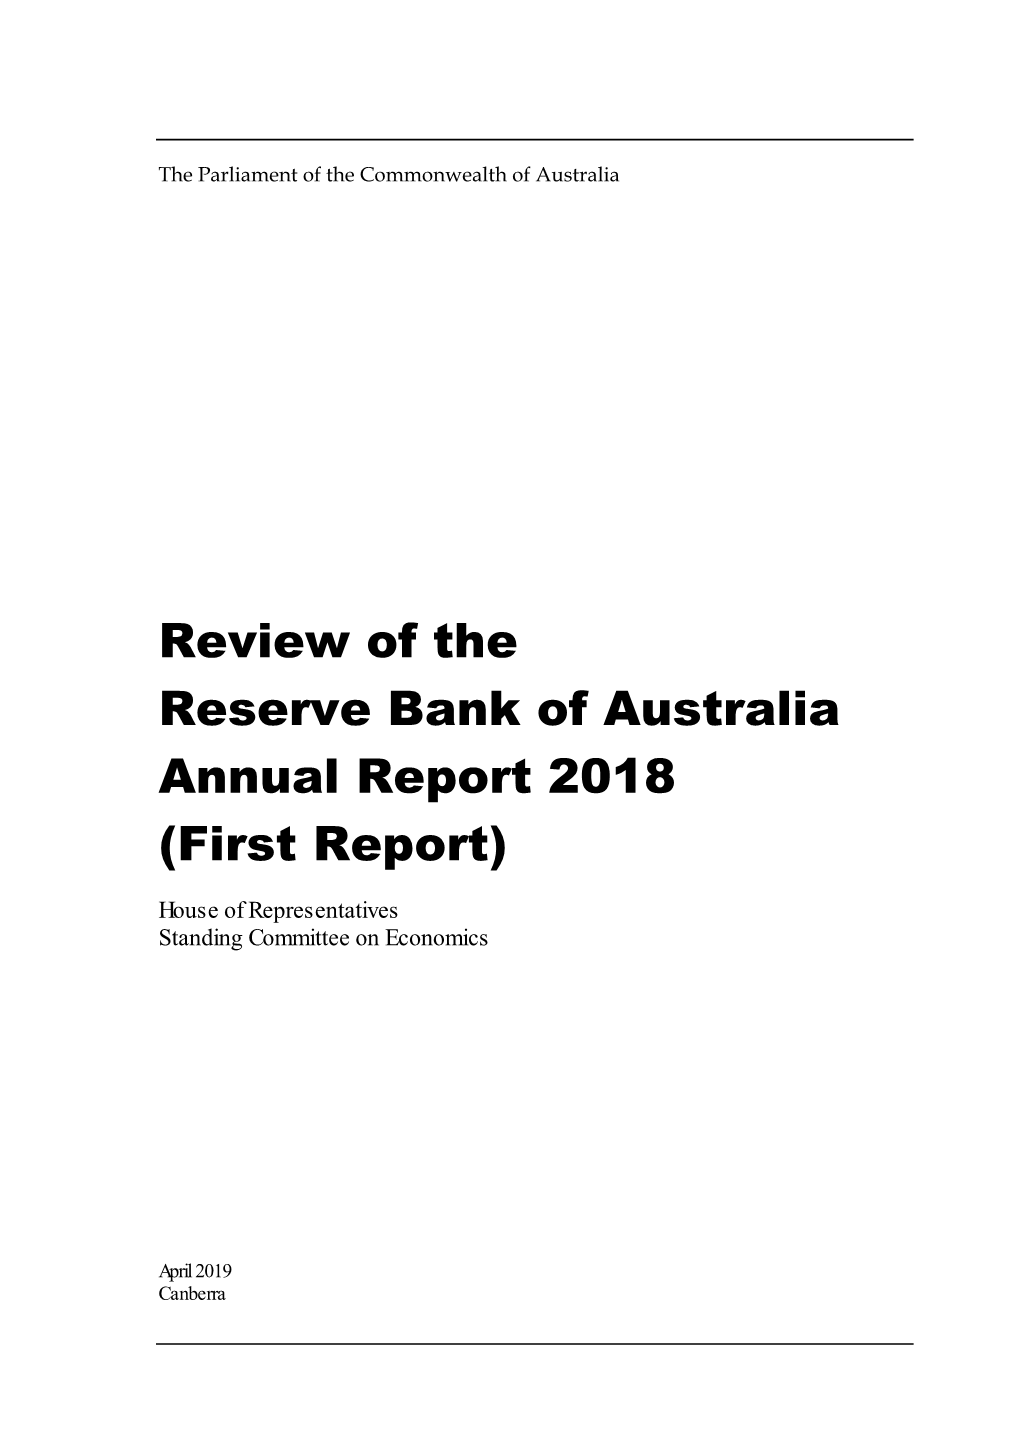 Review of the Reserve Bank of Australia Annual Report 2018 (First Report)